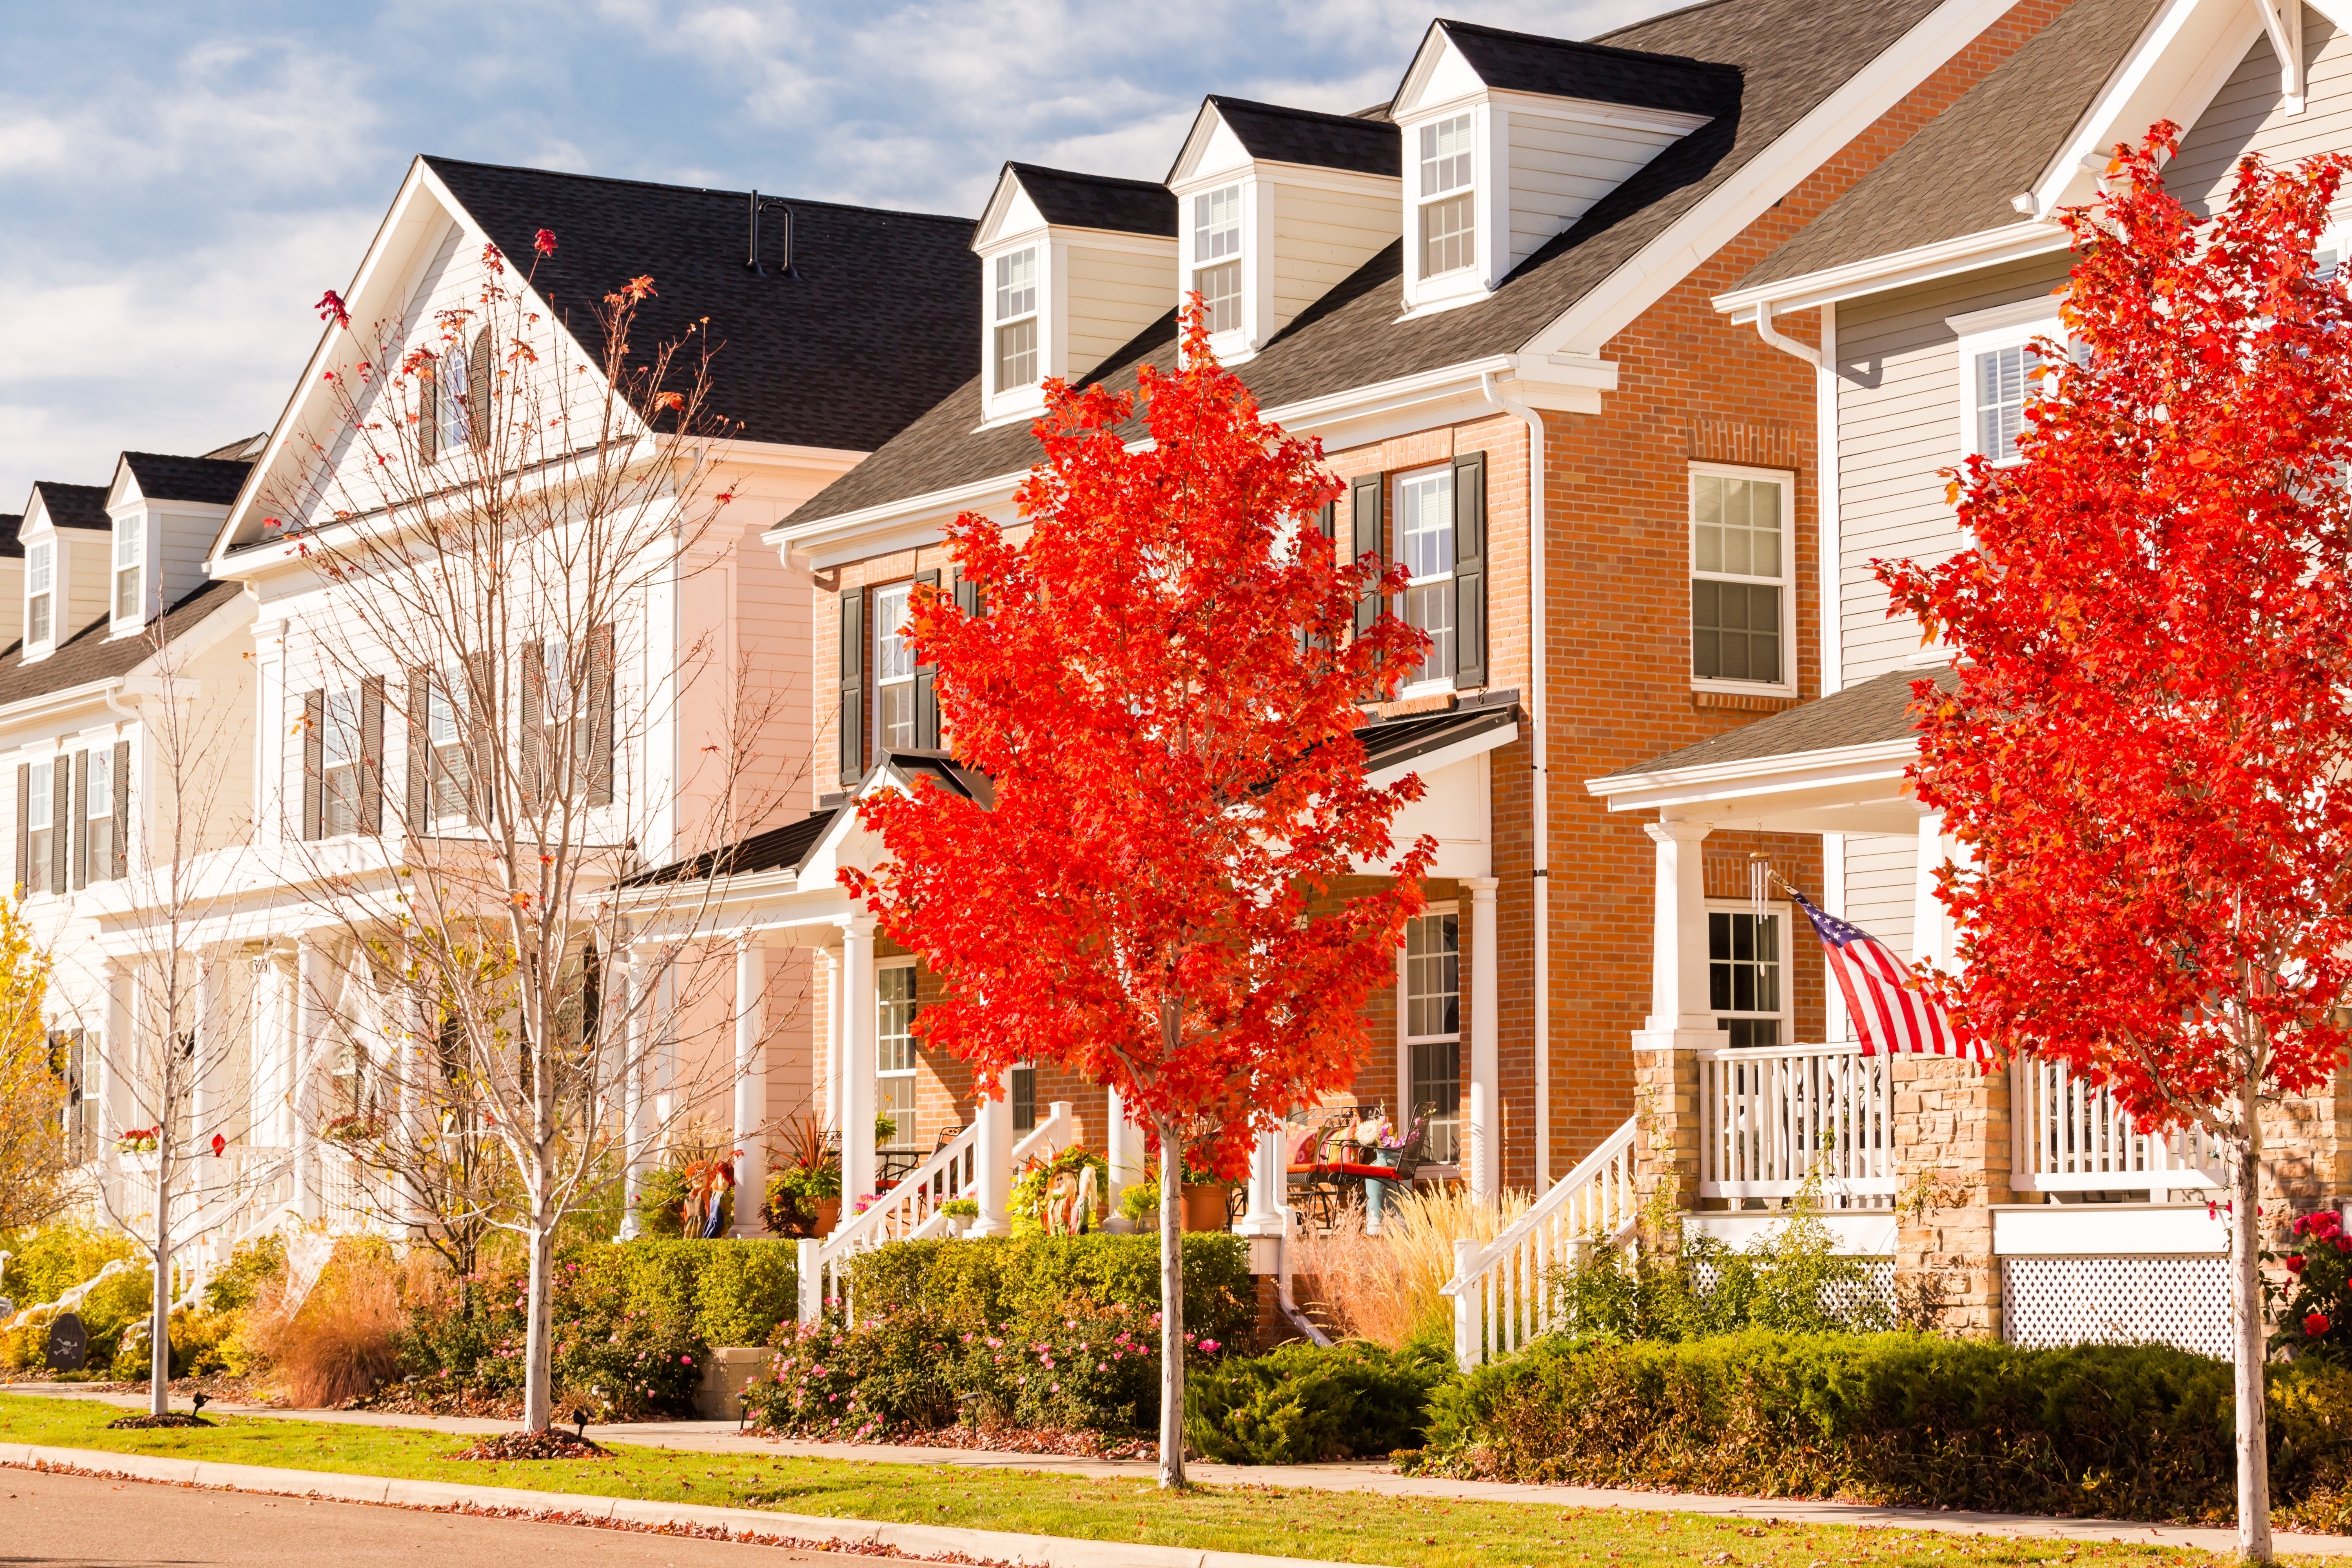 Homes close in proximity to one another with fall trees out front